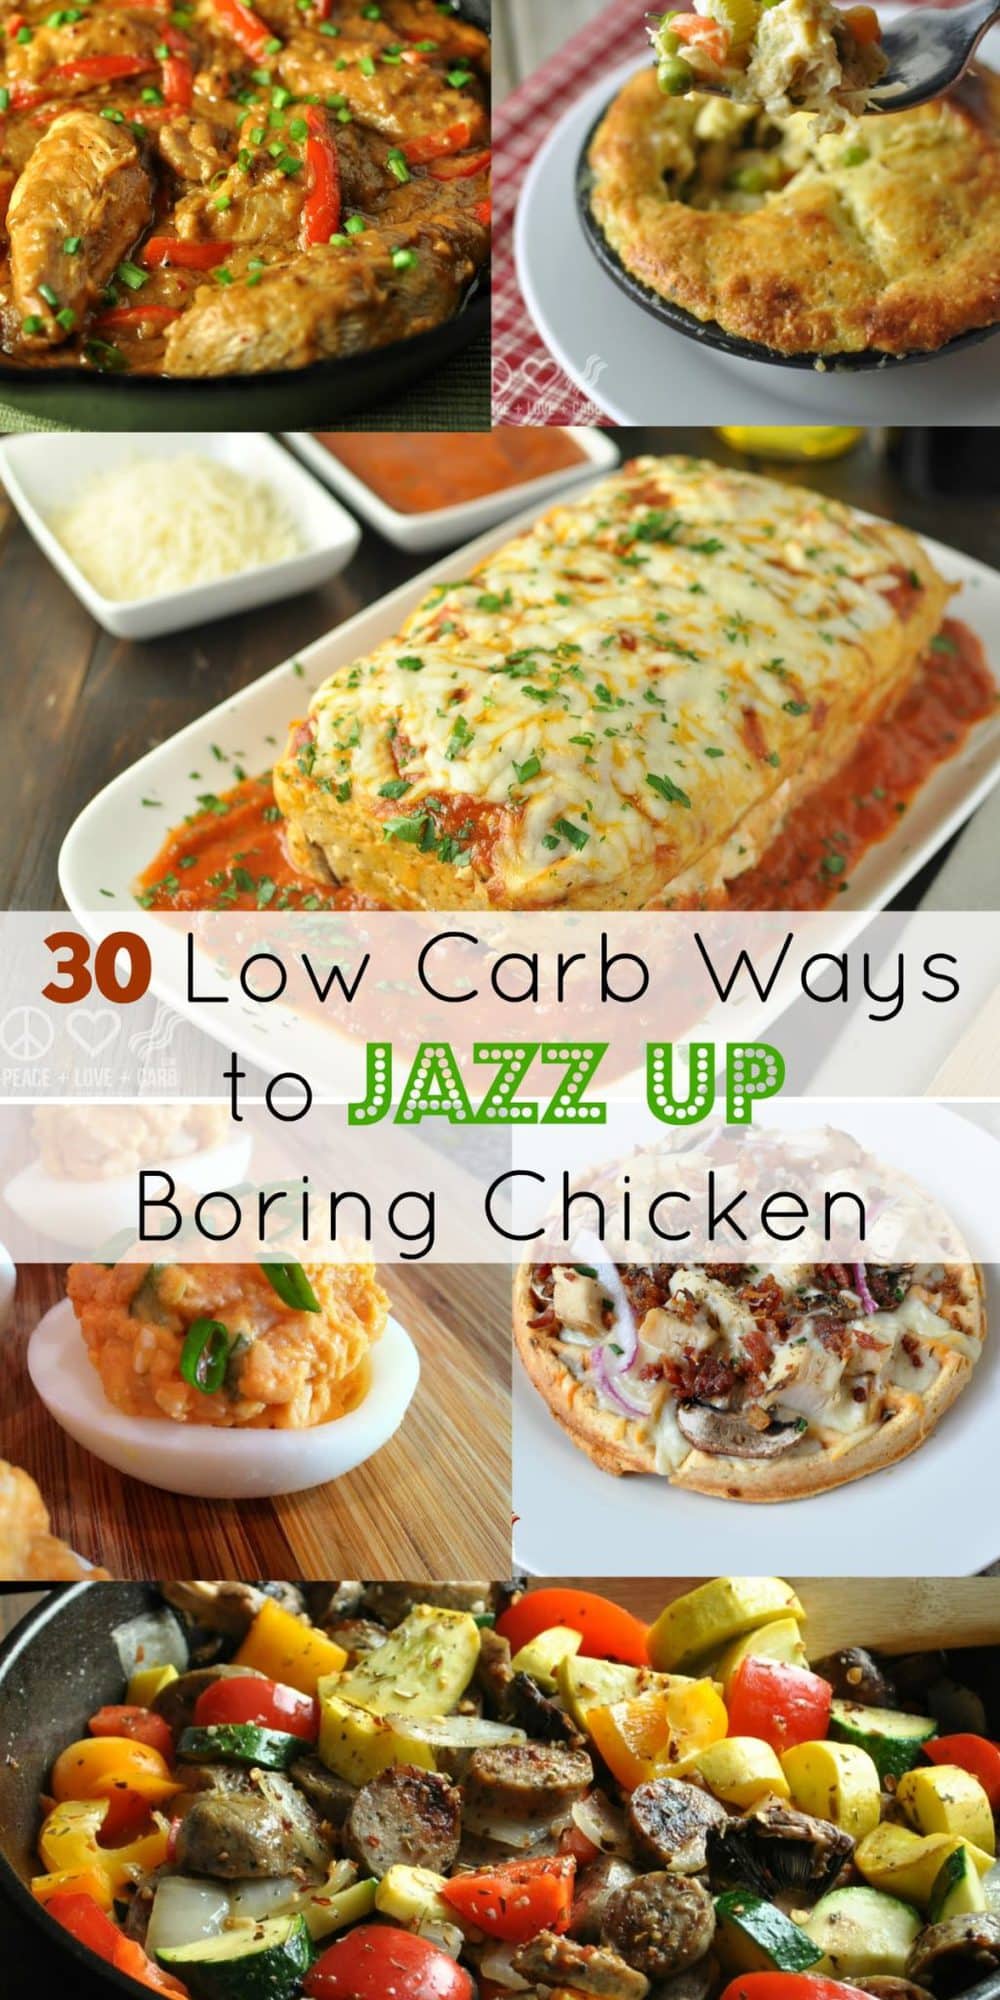 30 Low Carb Ways to Jazz Up Boring Chicken | Peace Love and Low Carb 